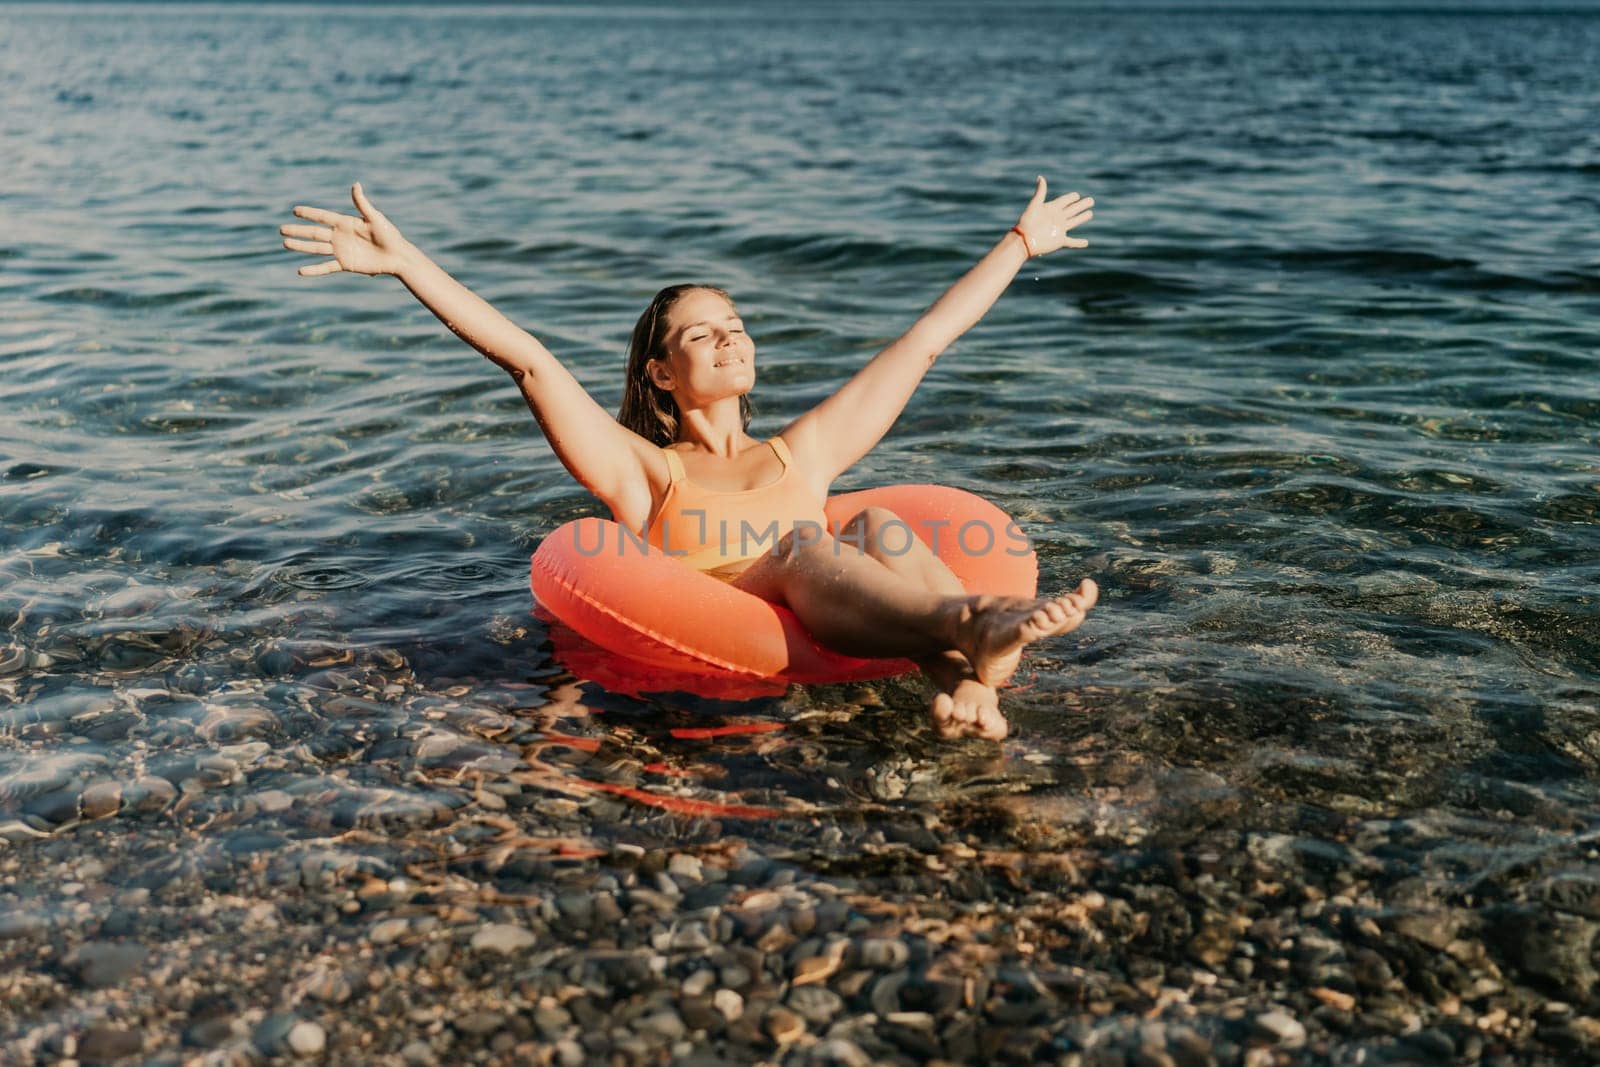 A woman is floating in a red inflatable raft on a body of water. She is smiling and she is enjoying herself